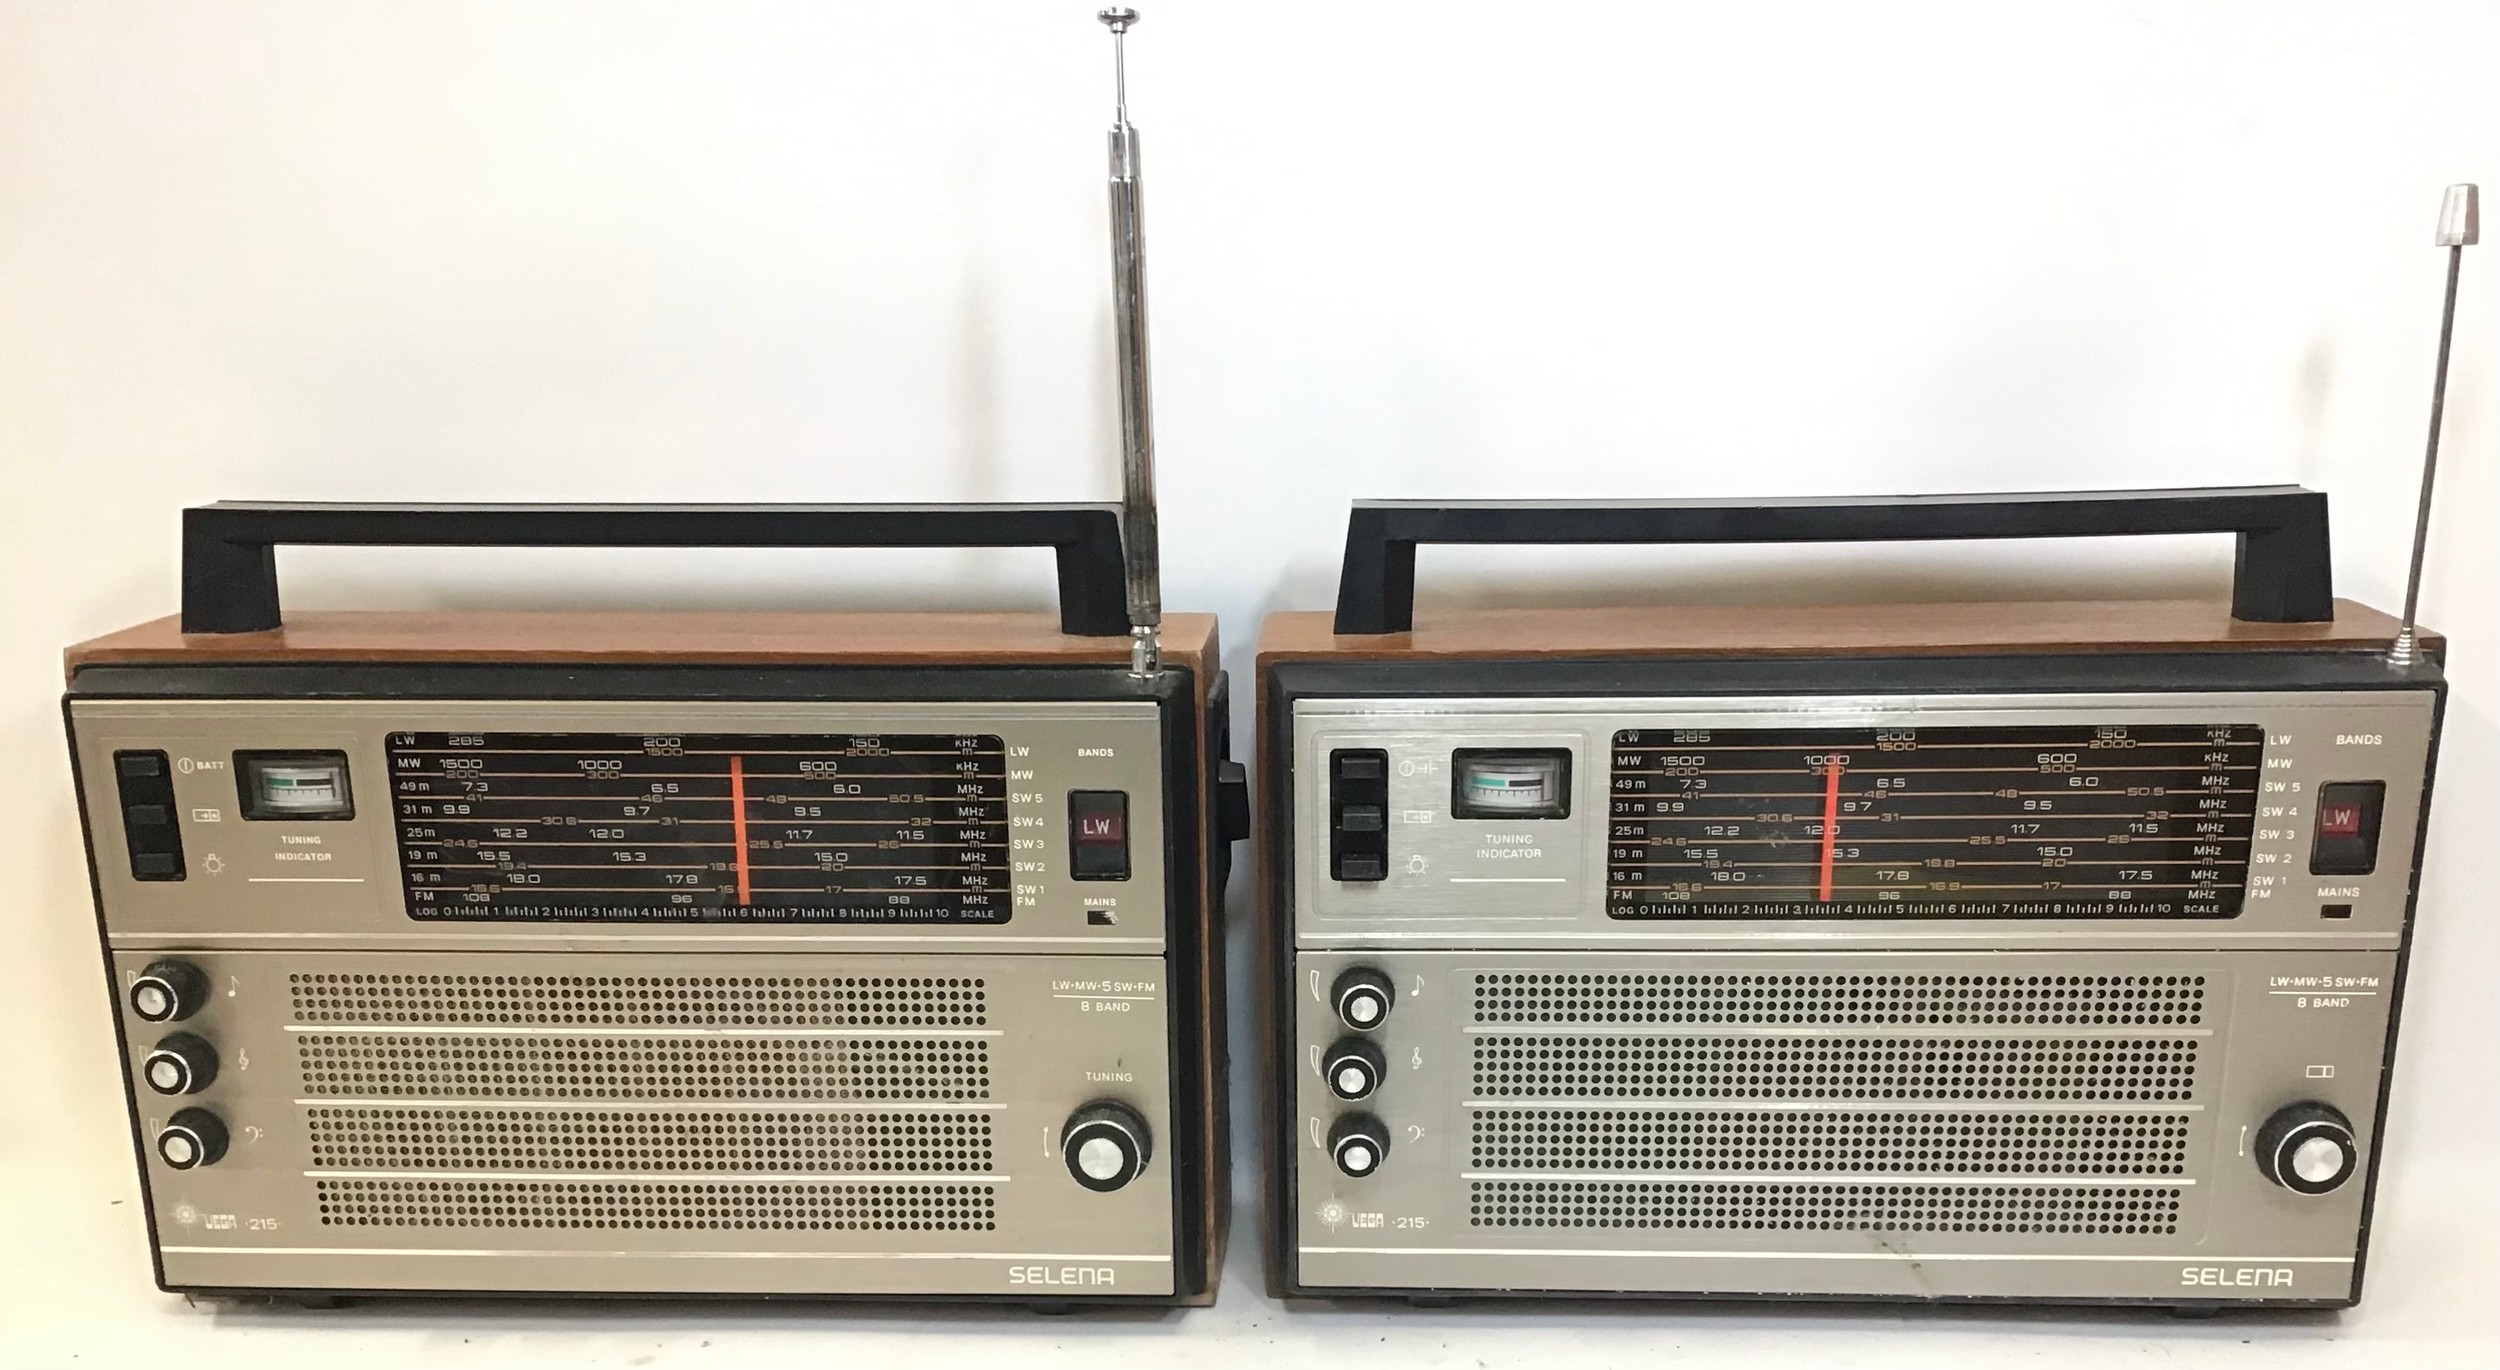 SELENA RADIO RECEIVERS X 2. Made in the USSR and having model No’s Vega 215. Both untested.